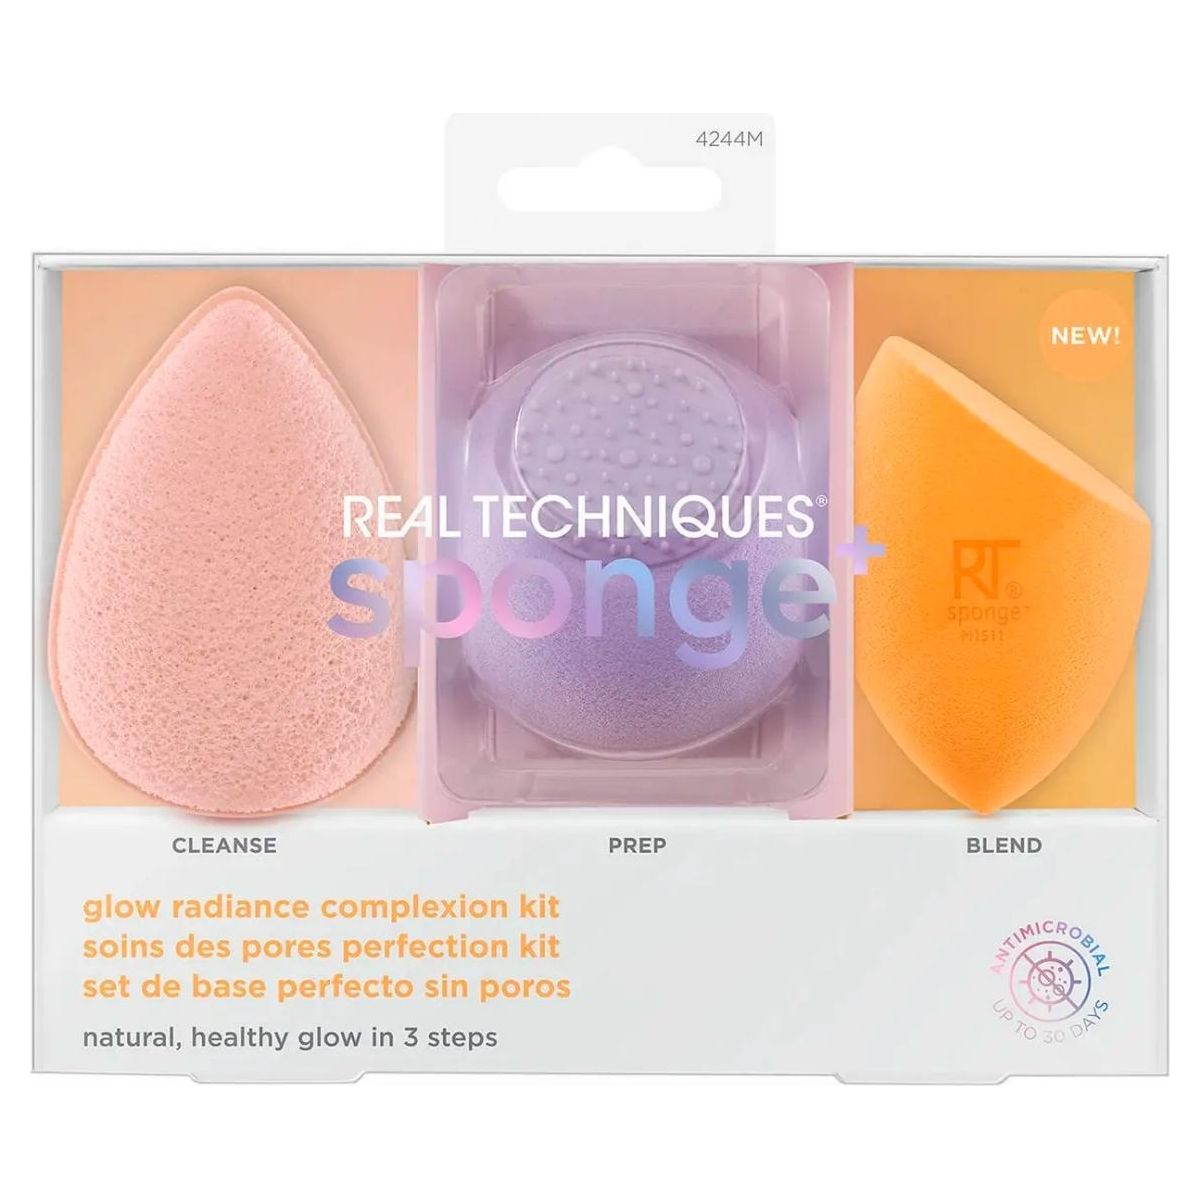 Real Techniques | Glow Radiance Complexion Kit - DG International Ventures Limited